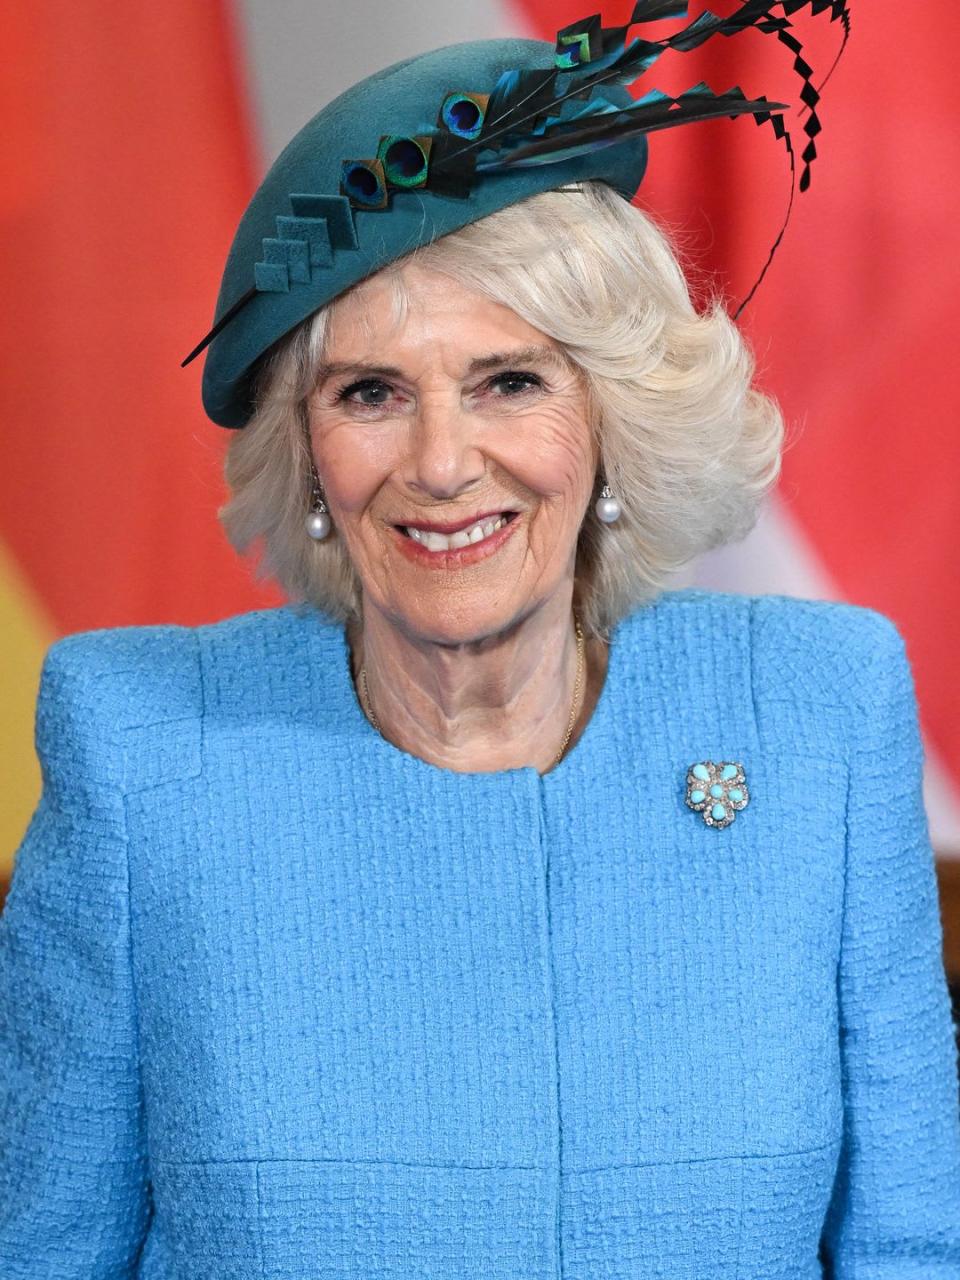 Camilla, Queen Consort at Schloss Bellevue presidential palace on the first day of the state visit to Germany on March 29, 2023 in Berlin, Germany.